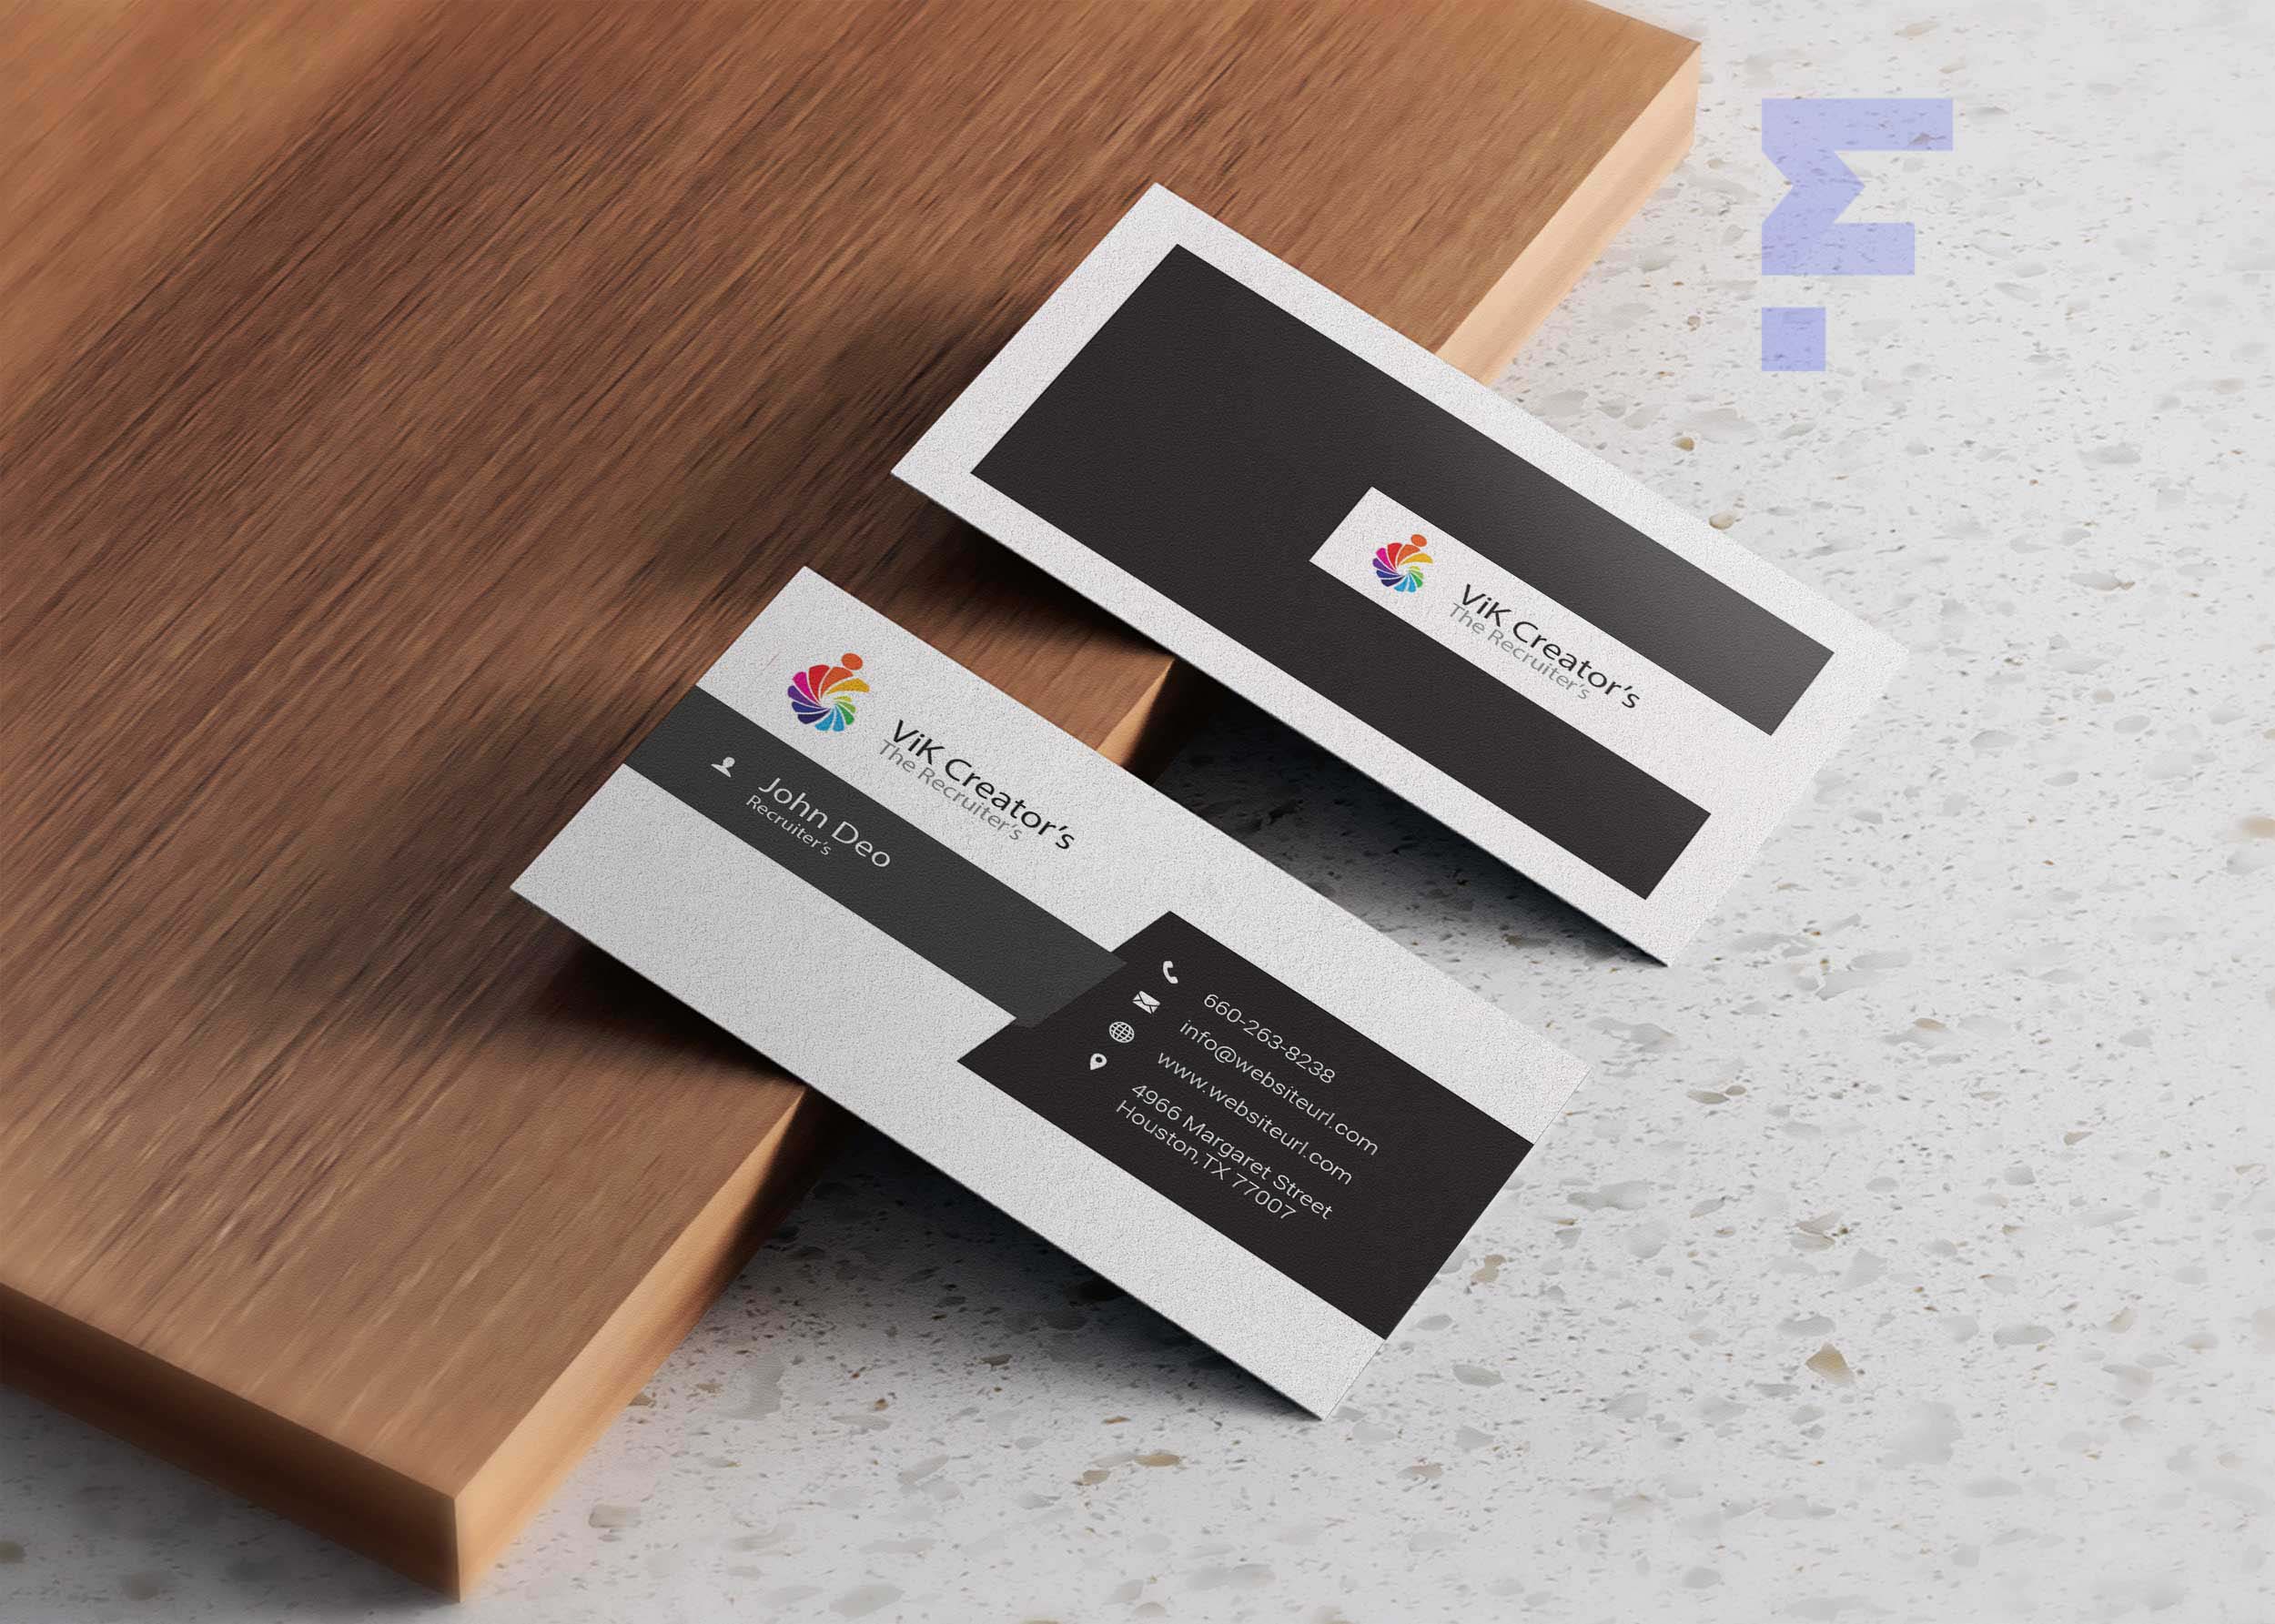 Free Business Card